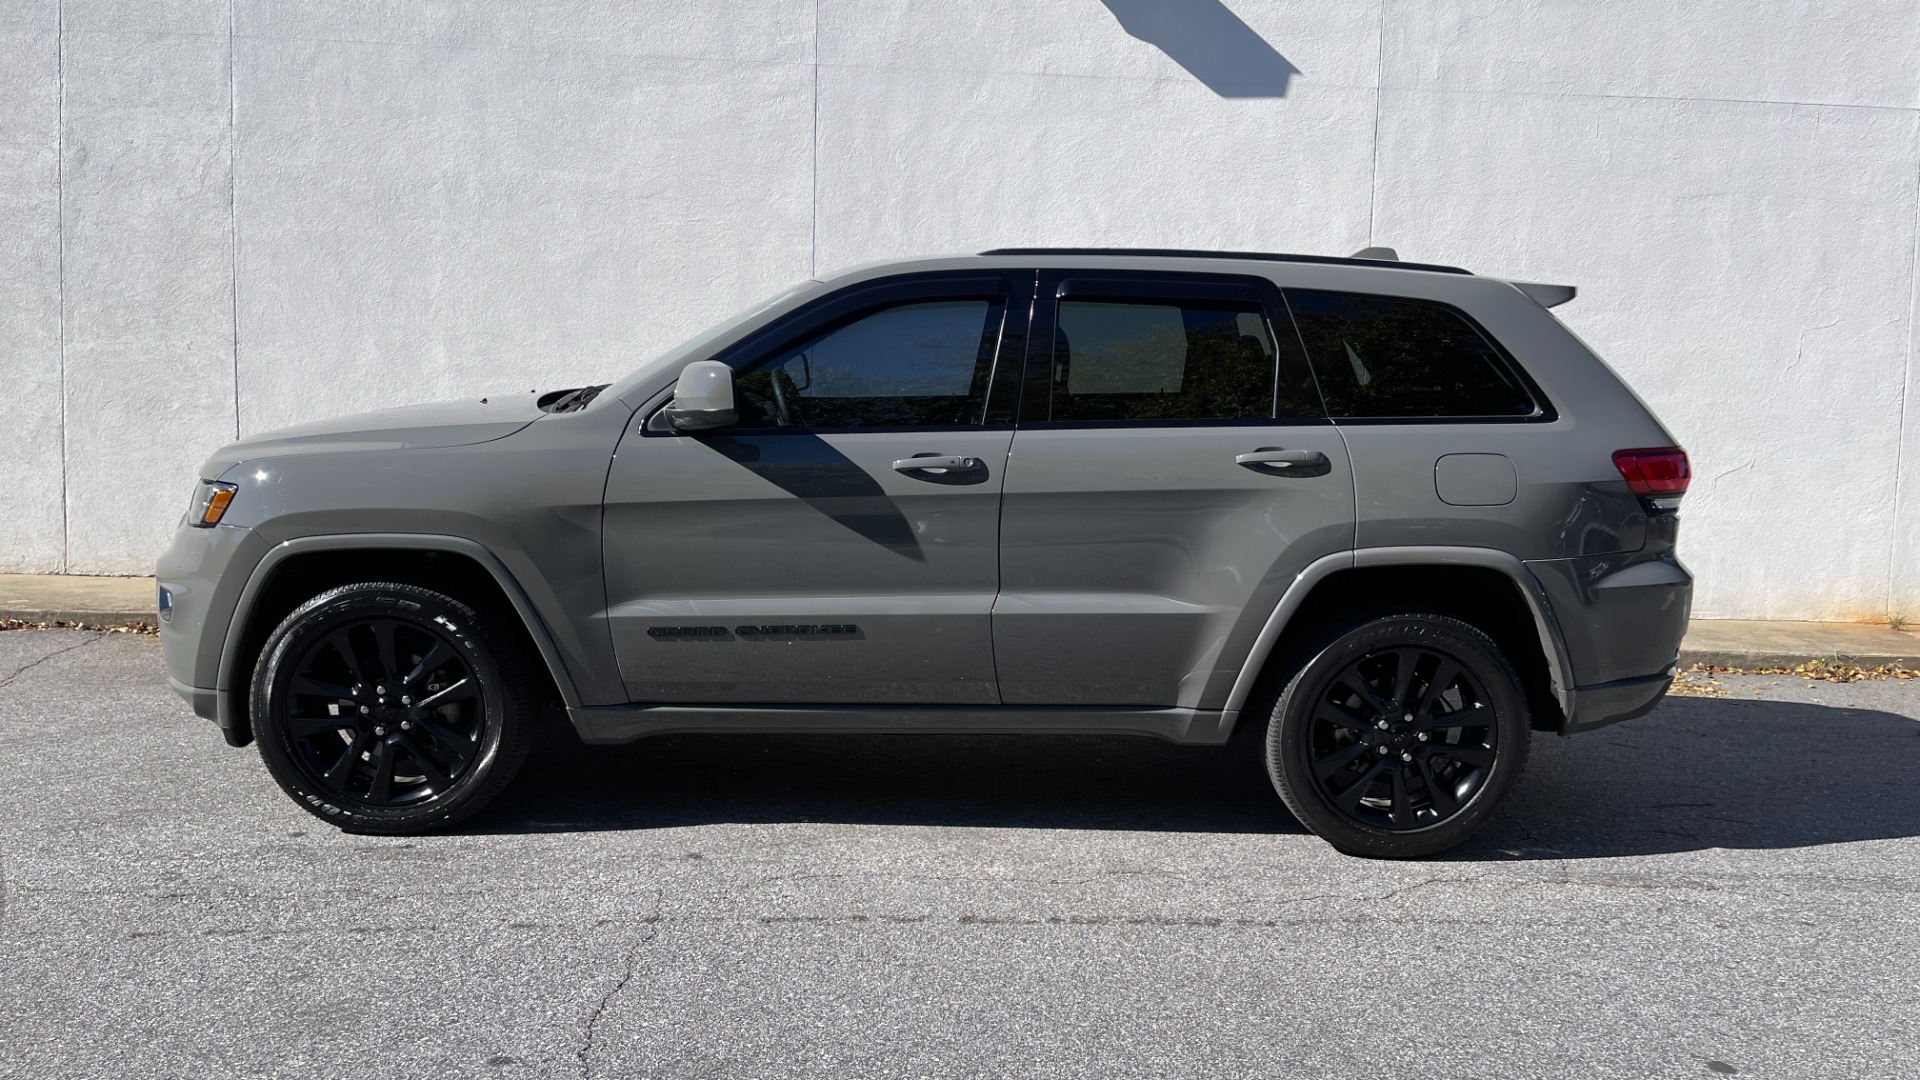 Used 2019 Jeep Grand Cherokee ALTITUDE / BLACK 20IN WHEELS / BLACK TRIM / SUNROOF / HEATED SEATS for sale $34,495 at Formula Imports in Charlotte NC 28227 5